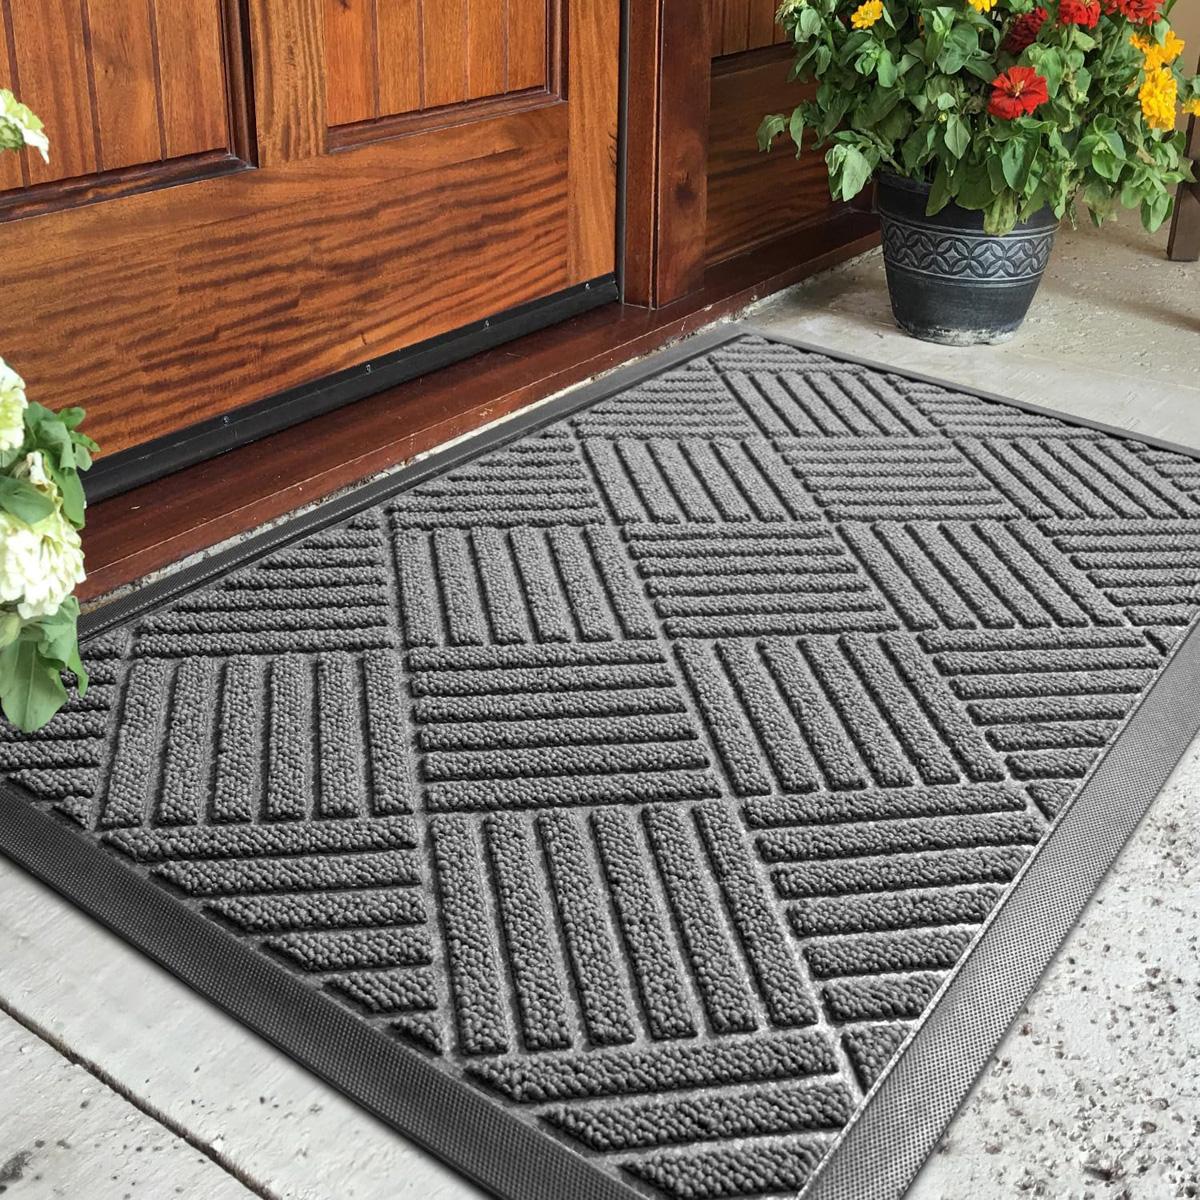 All-Weather Front Heavy Duty Durable Doormat for $4.49 Shipped